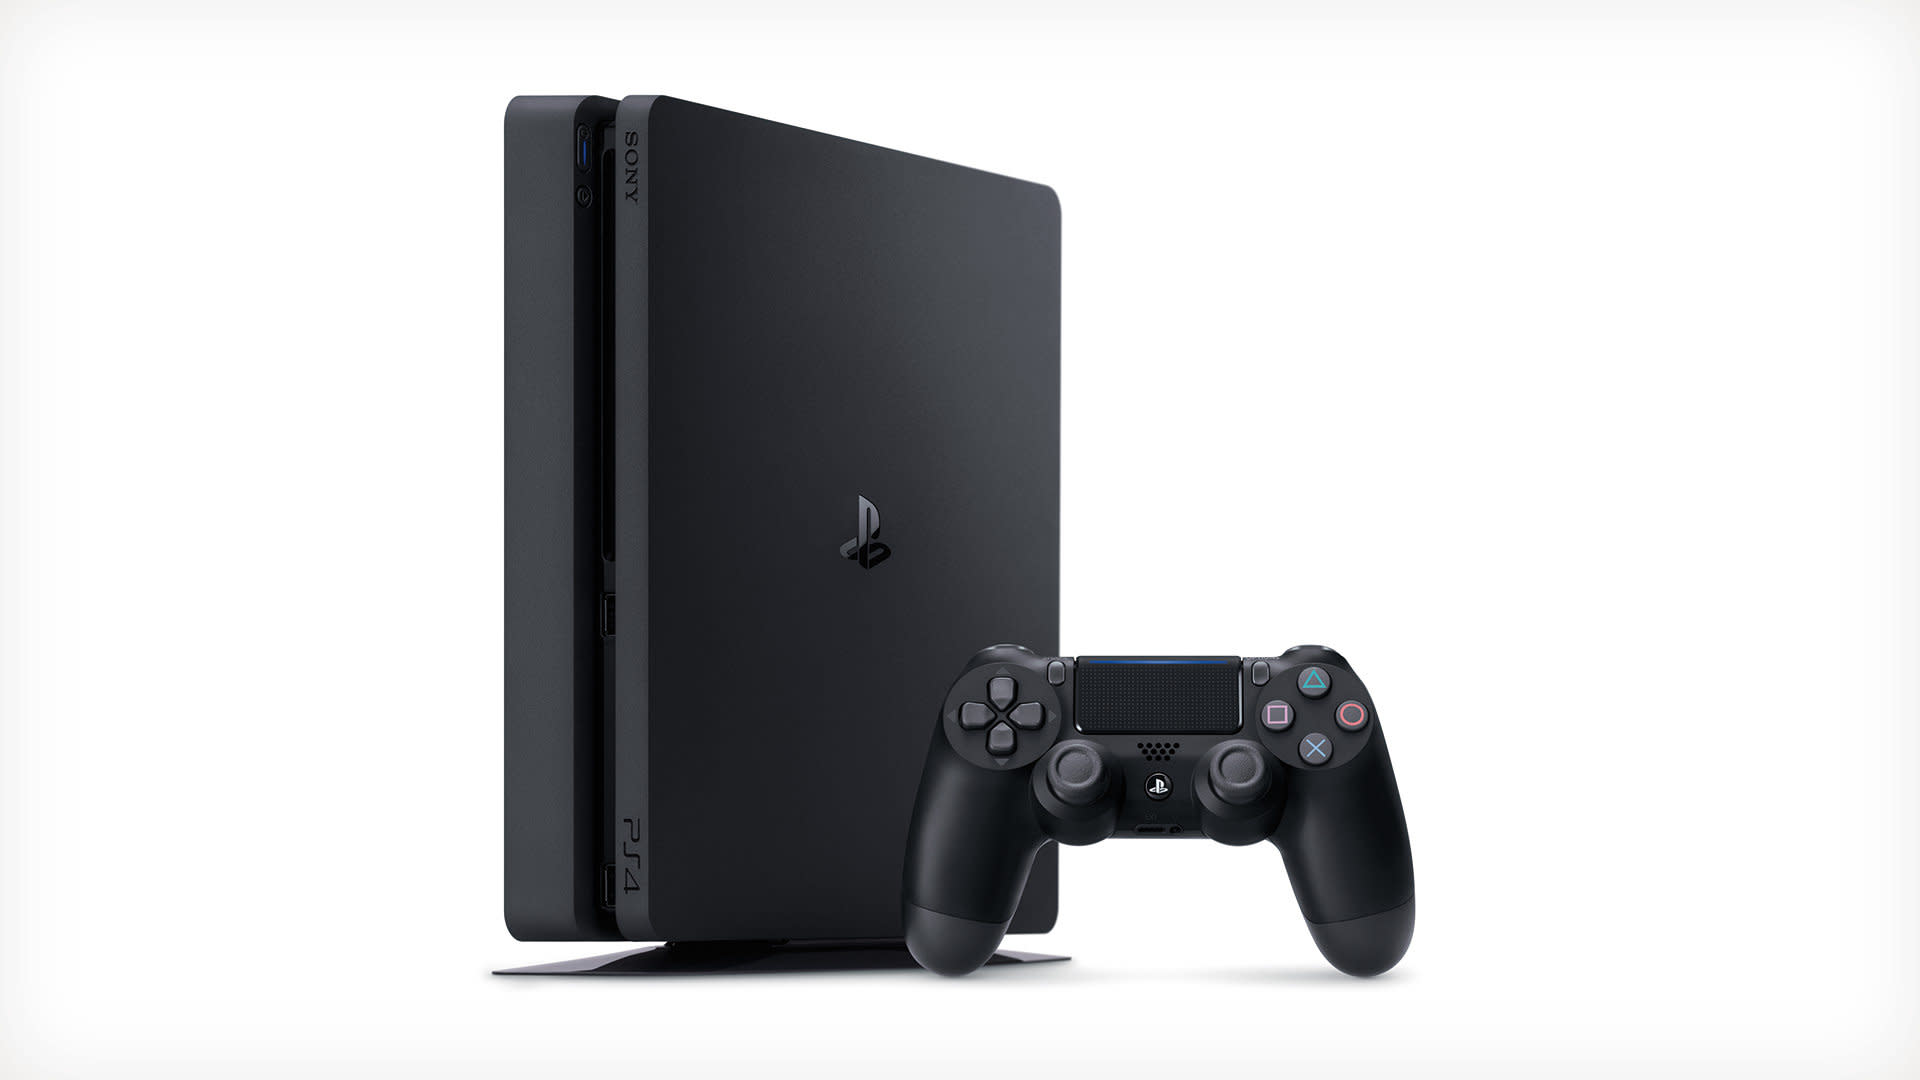 The PS4 Slim hits shelves on September 15th for $300 | Engadget